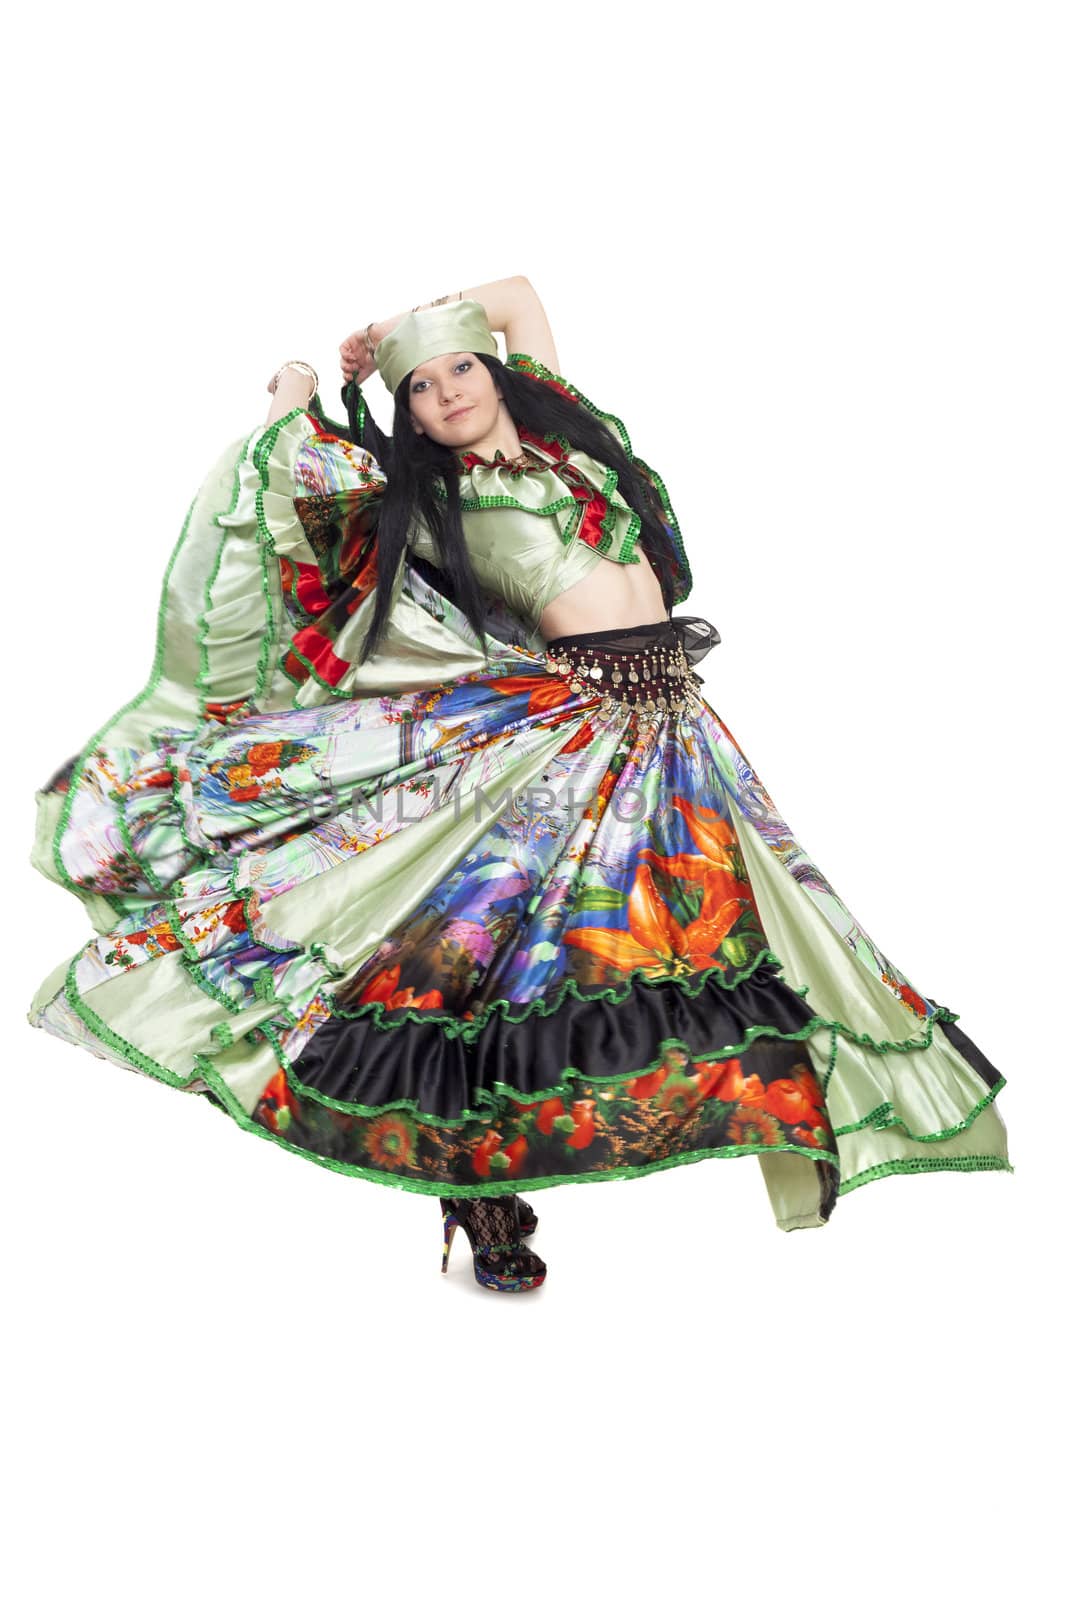 Image of gipsy dancer in traditional dress in motion